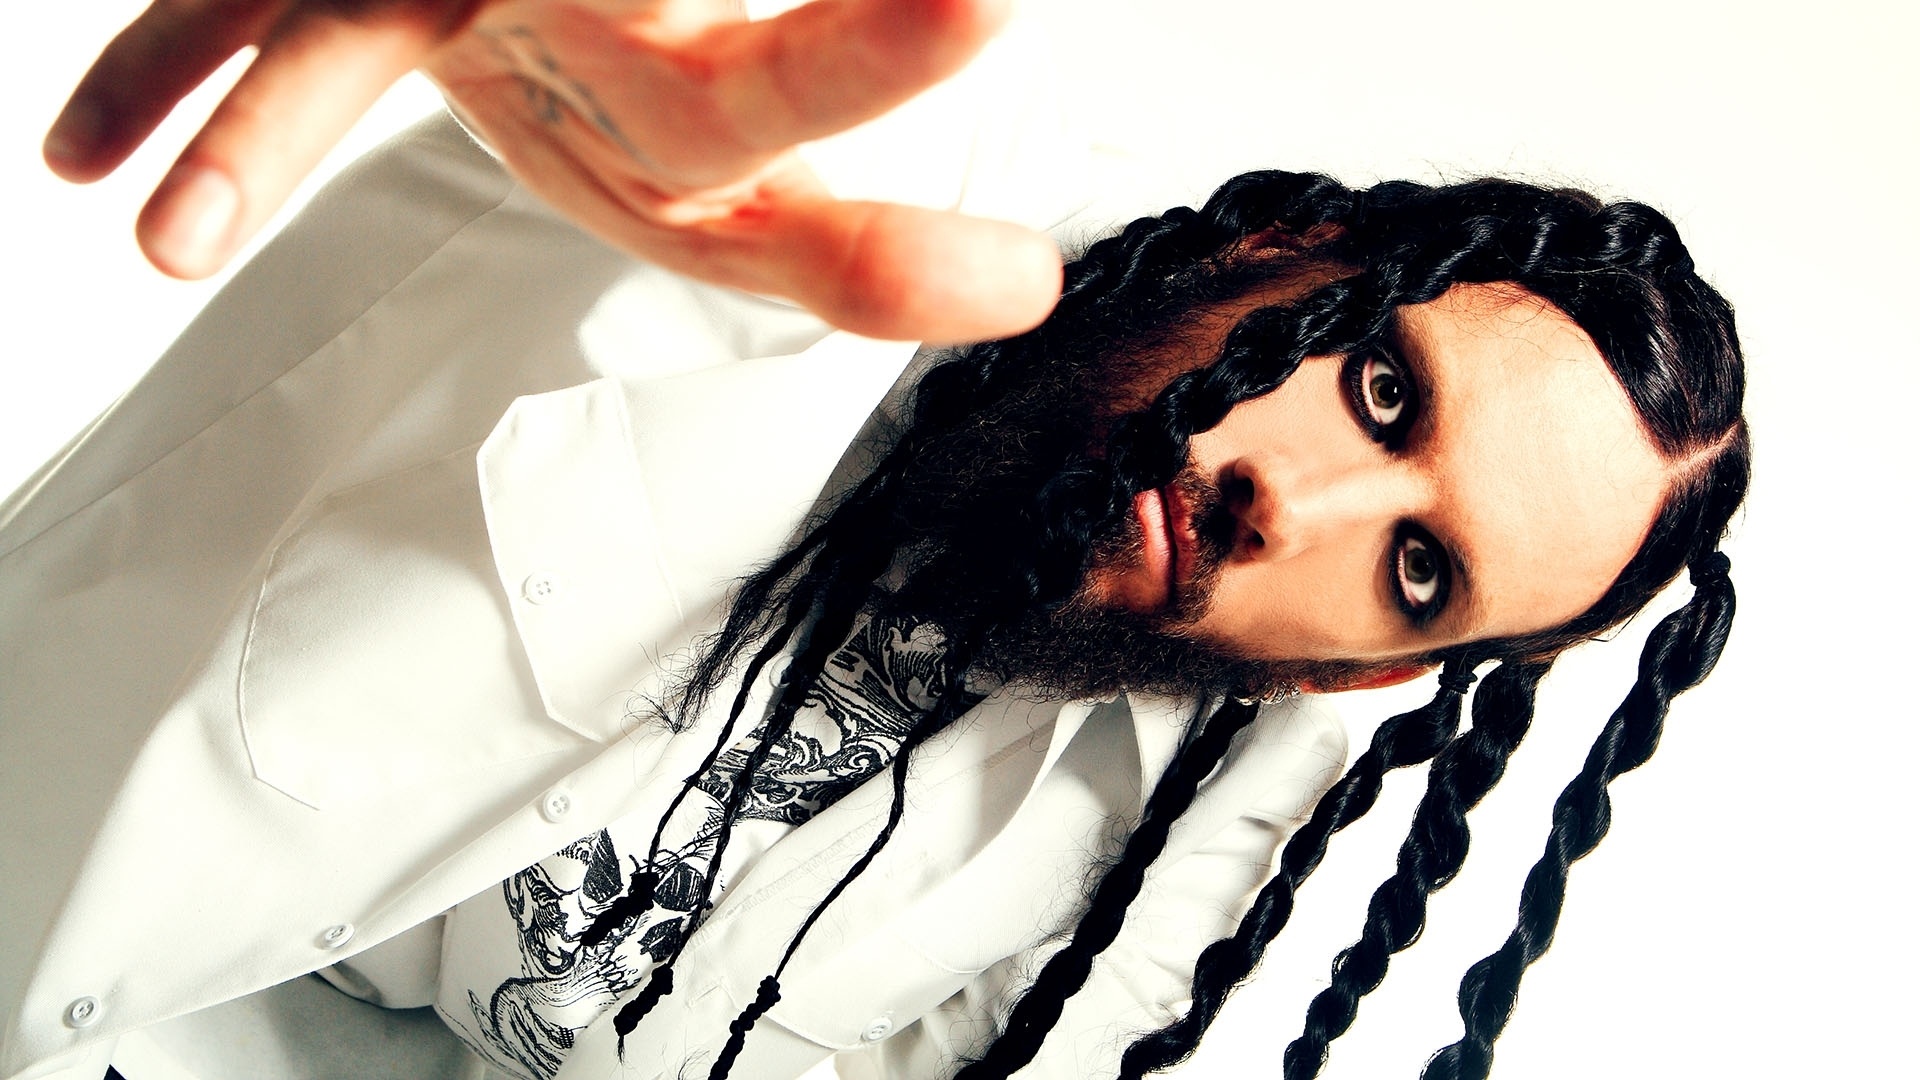 Brian Welch, Musician, HD wallpapers, Images and backgrounds, 1920x1080 Full HD Desktop